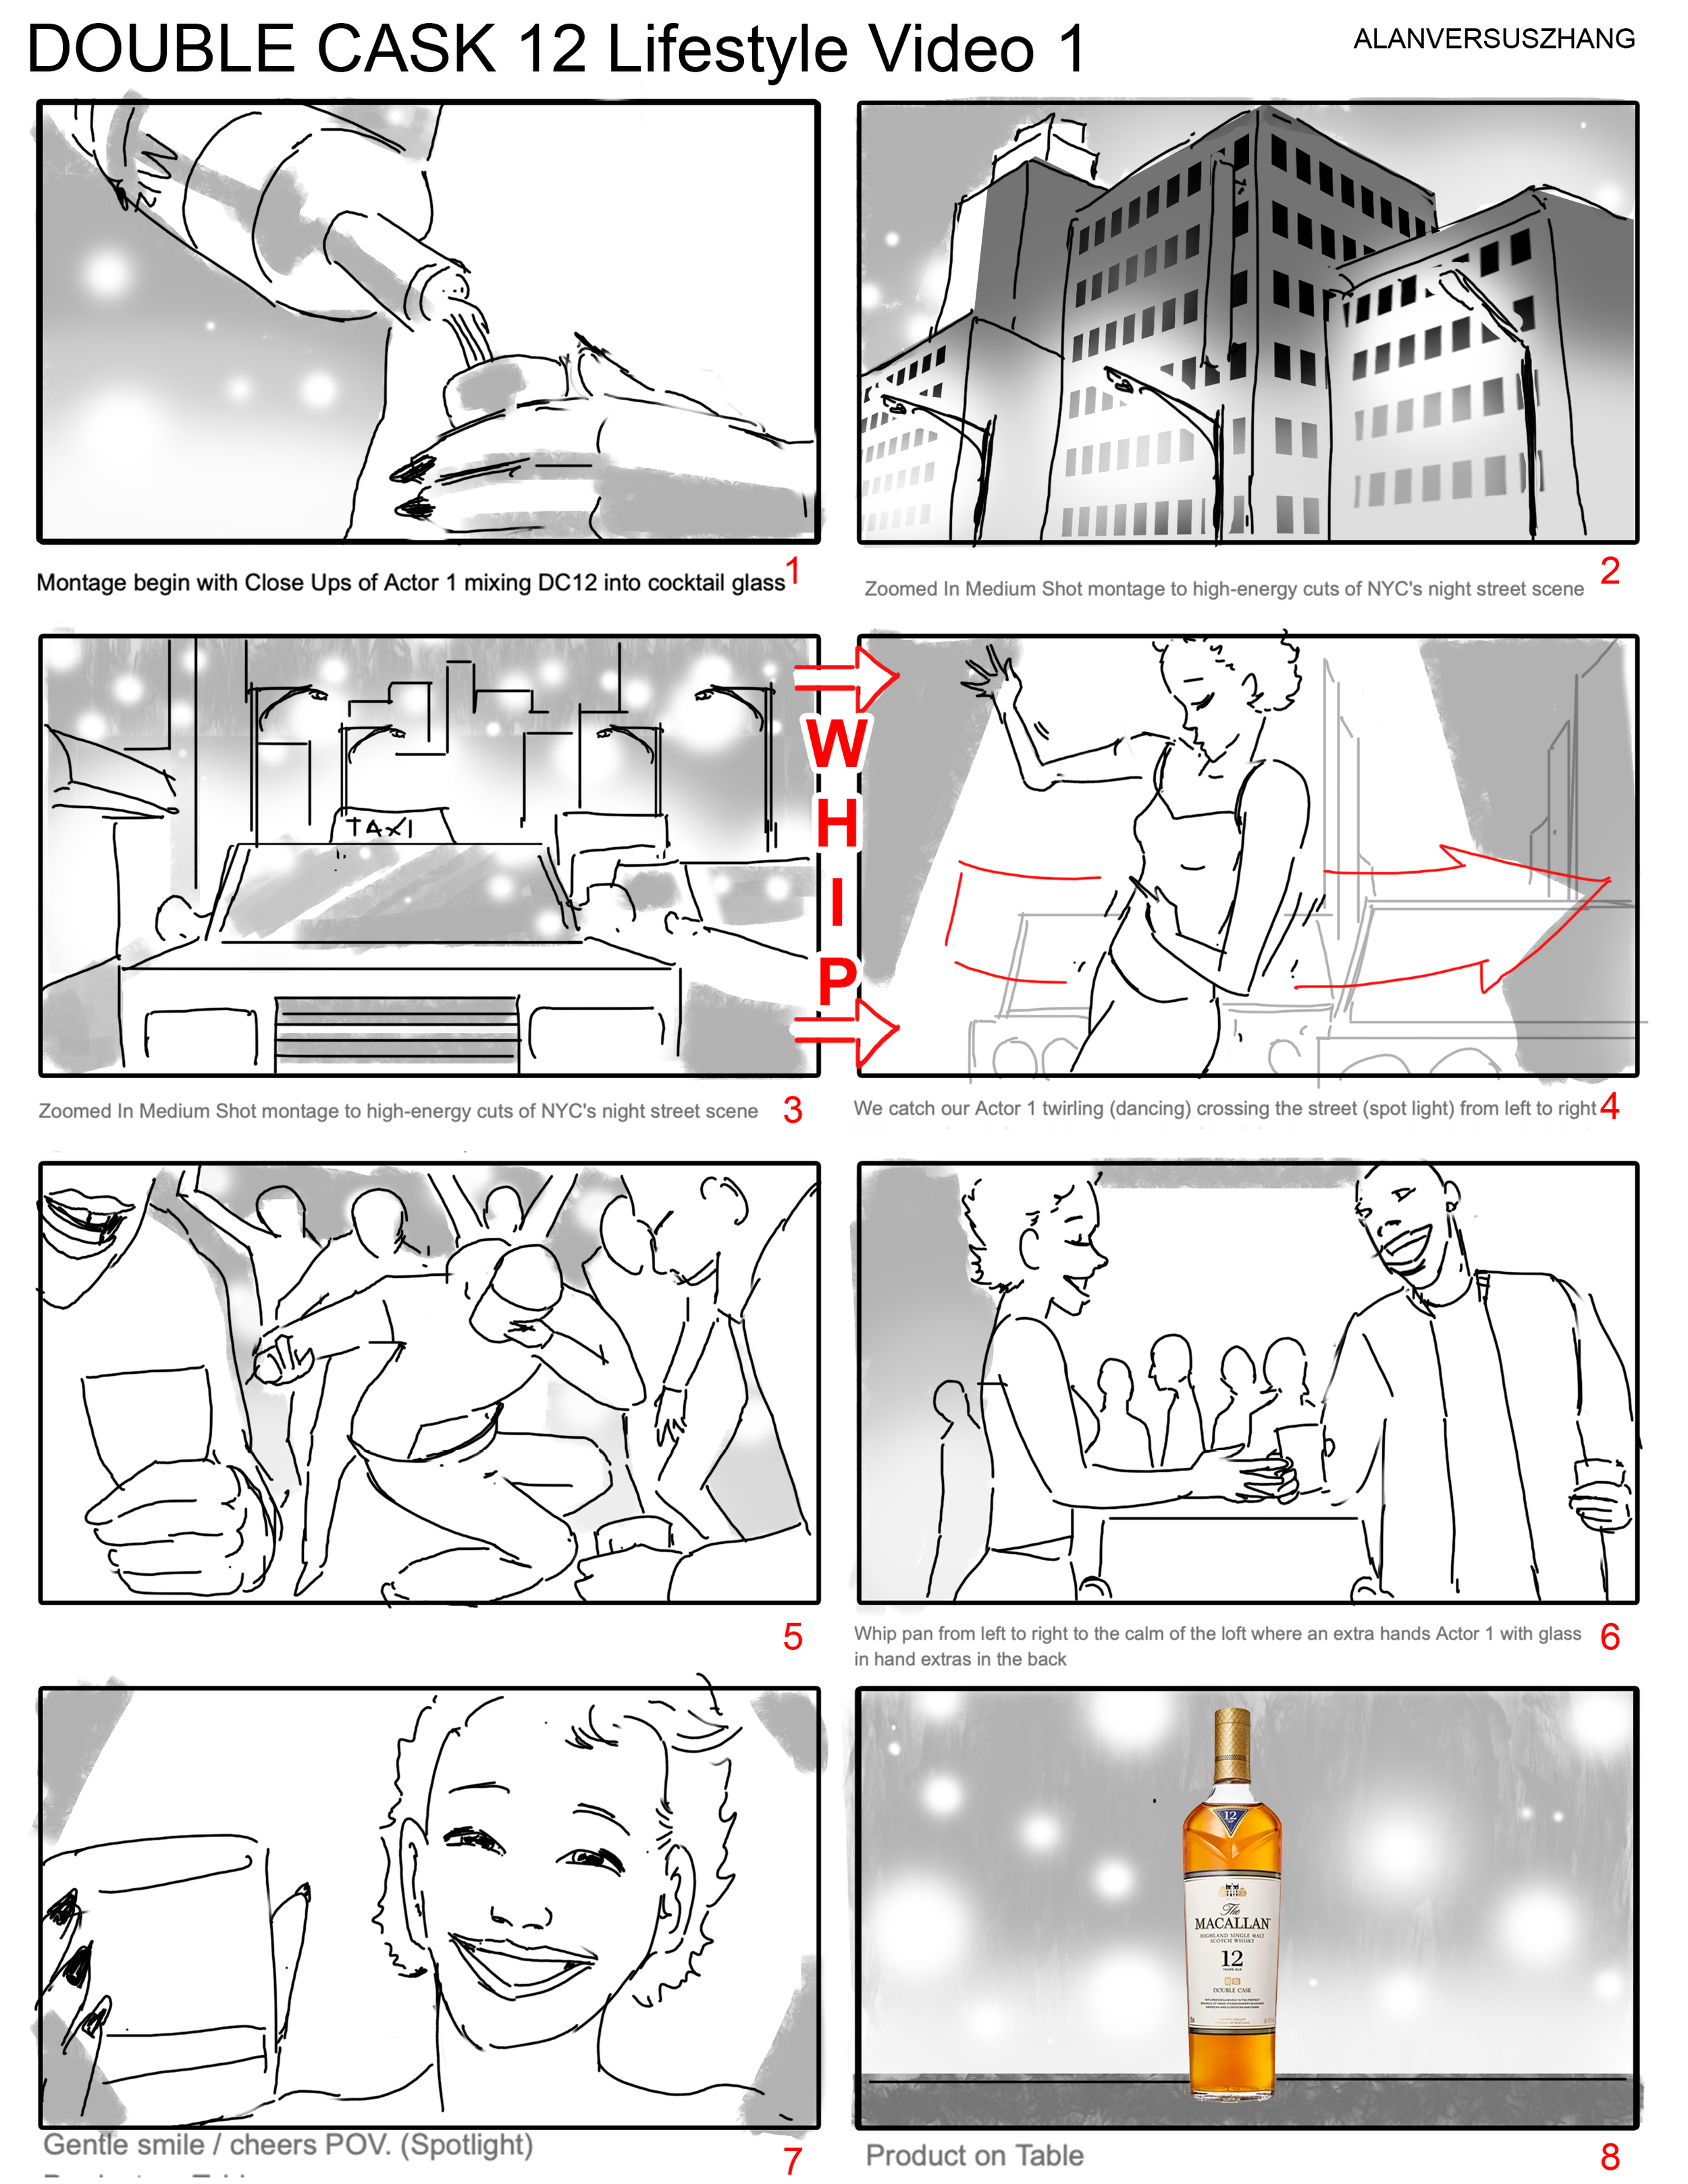 11.10.23_Macallan_Storyboards_Page_03_Image_0001.png